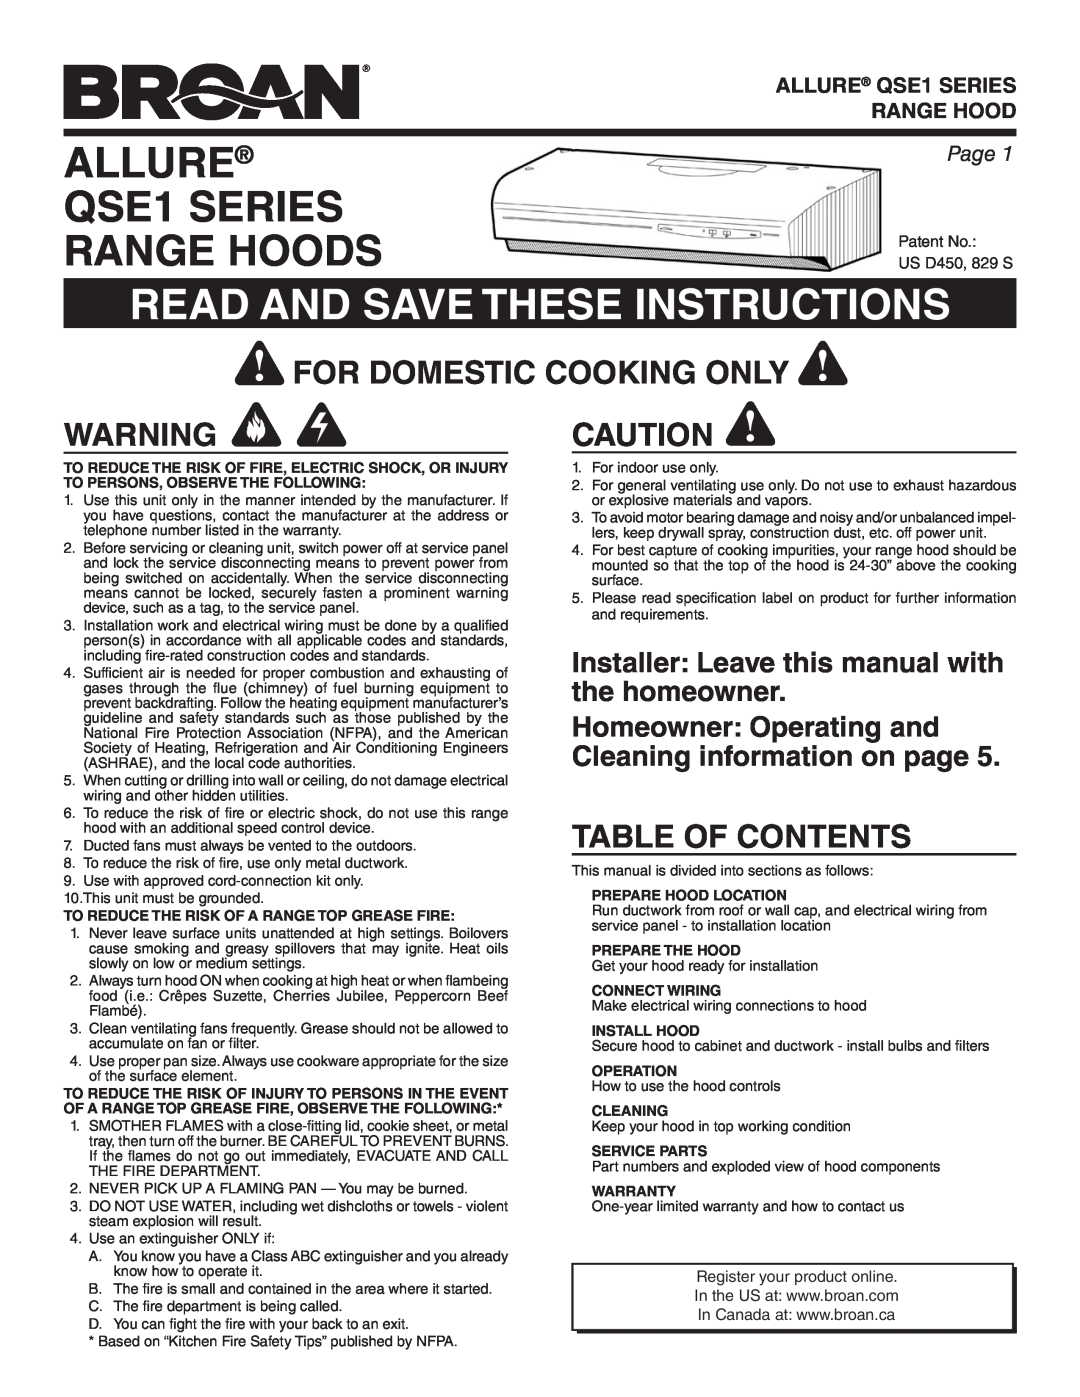 Broan QSE1 warranty Read And Save These Instructions, For Domestic Cooking Only, Table Of Contents, Range Hood, Page 